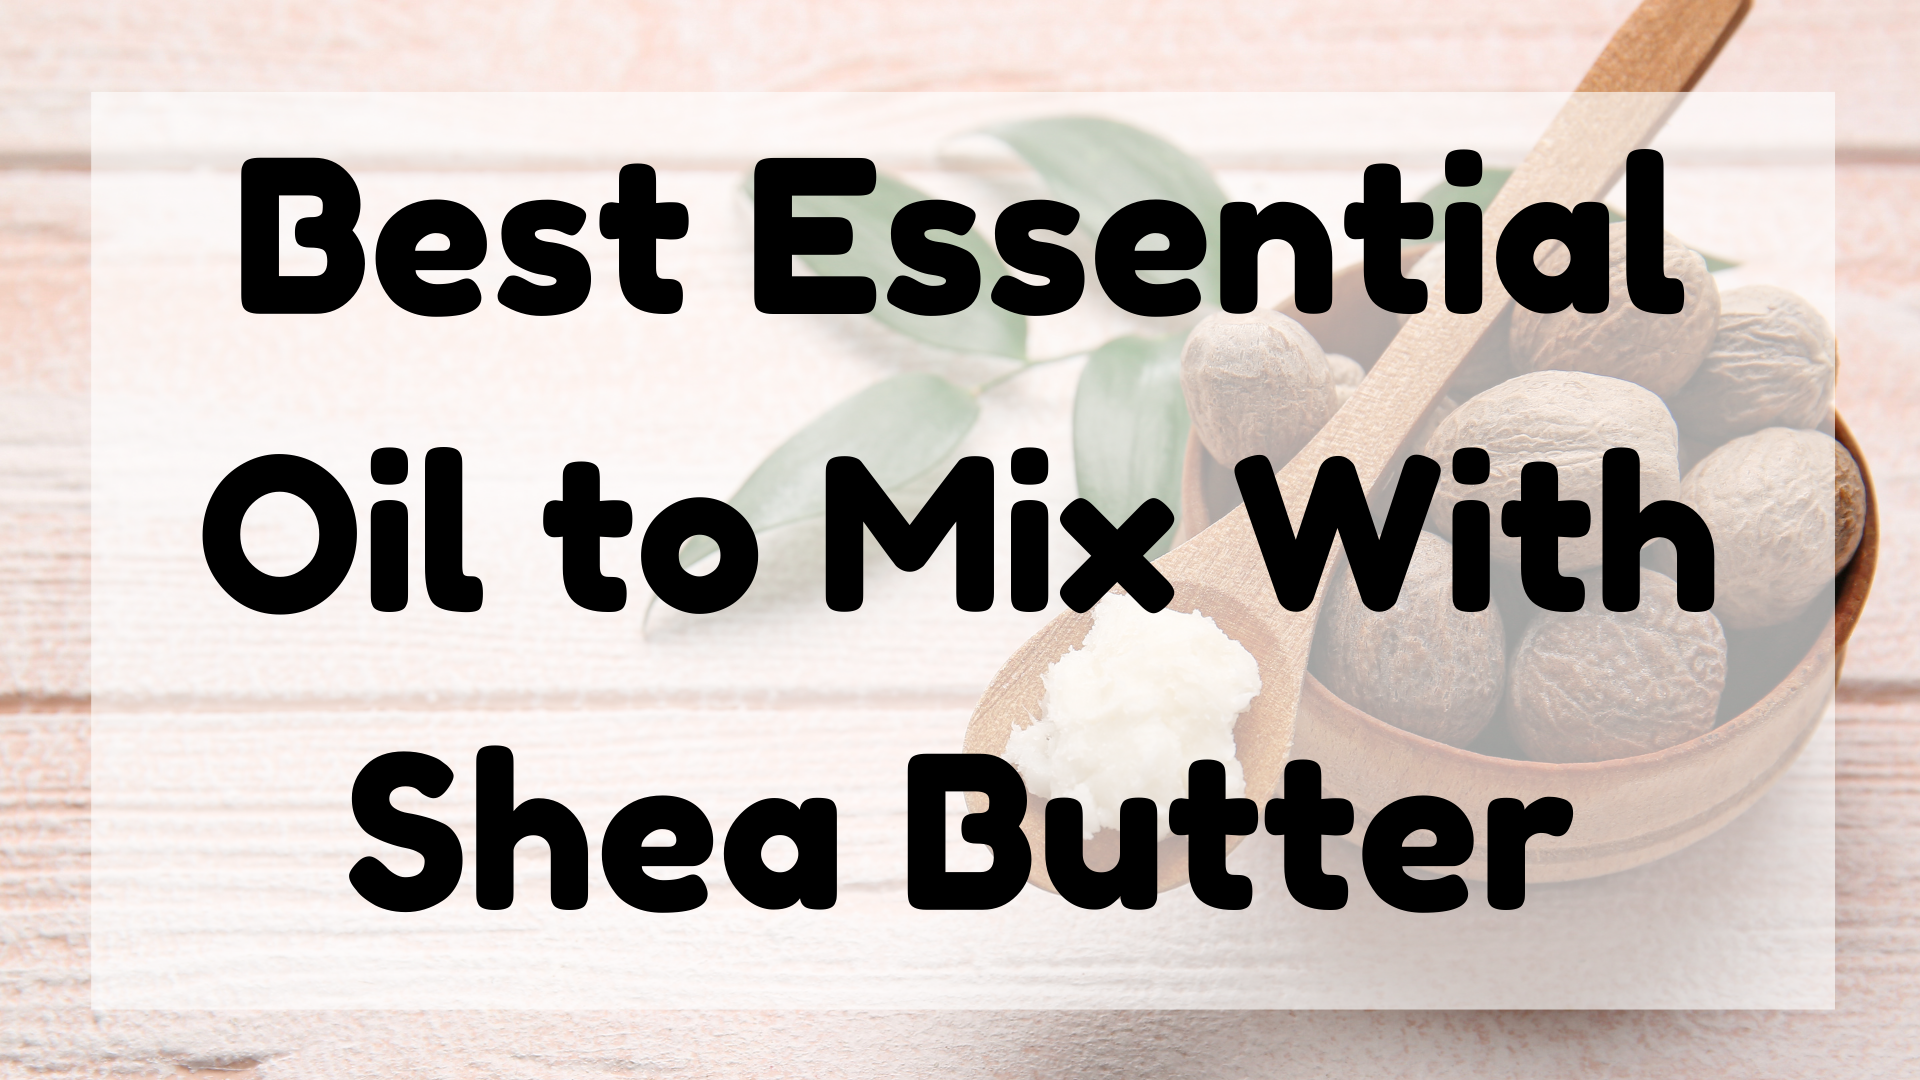 Best Essential Oil to Mix With Shea Butter featured image